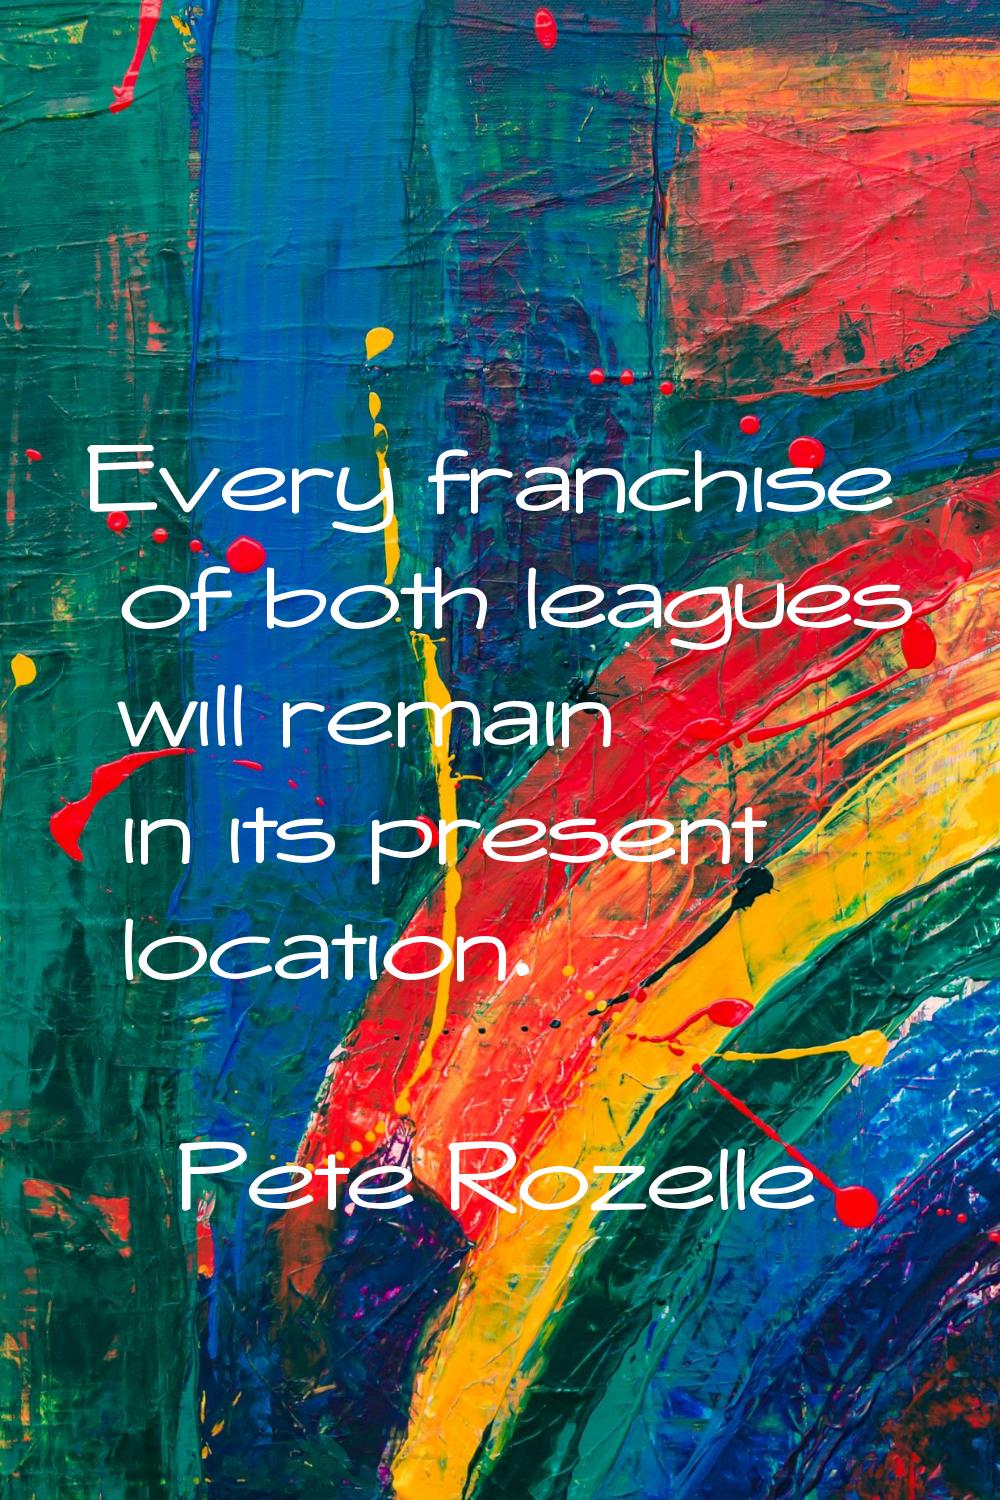 Every franchise of both leagues will remain in its present location.